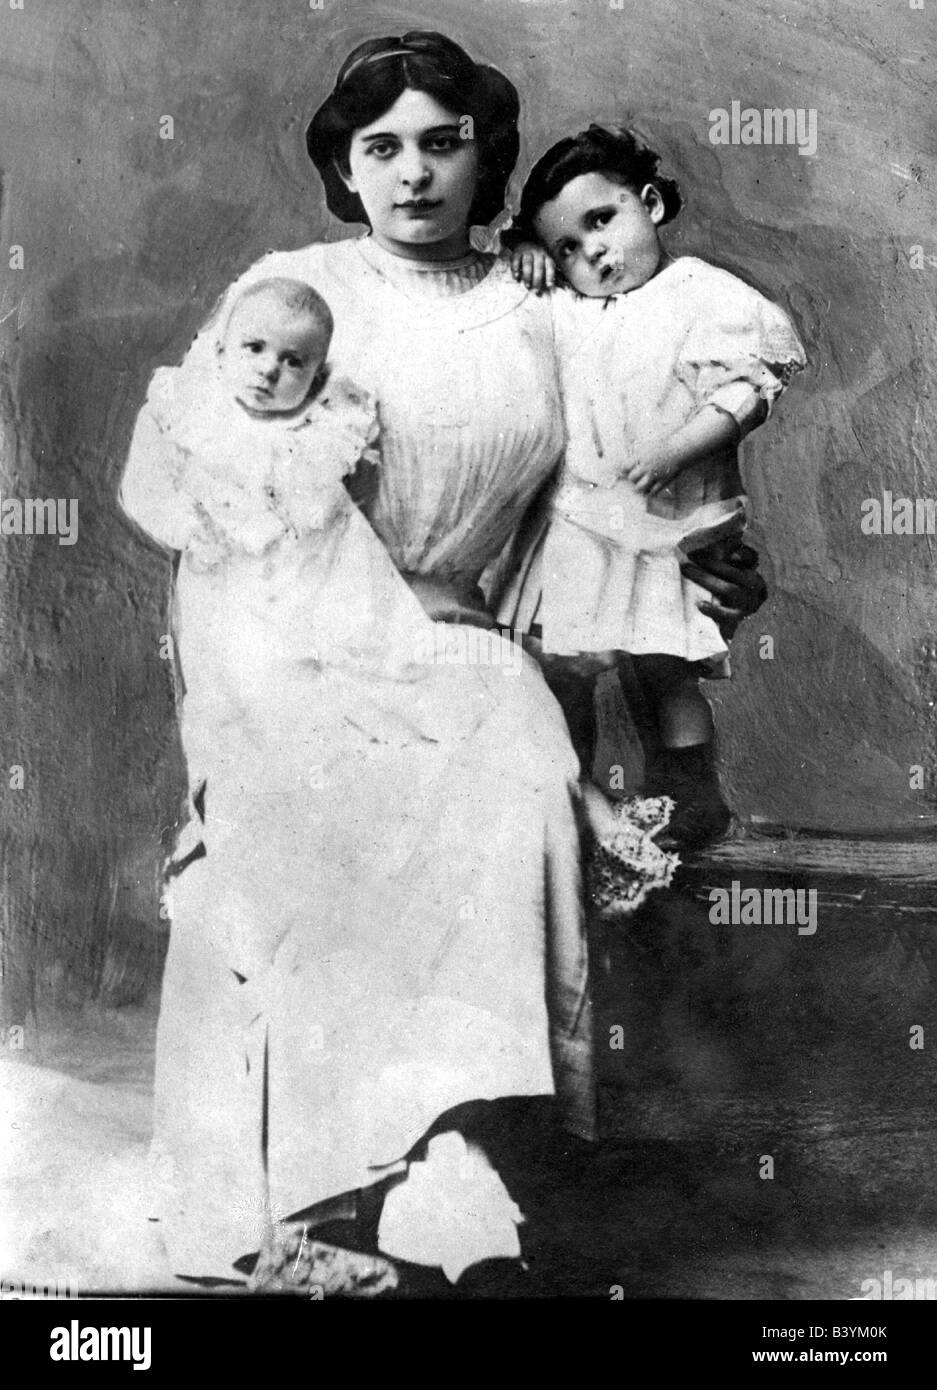 transport / transportation, navigation, Titanic, picture of Madame Navratil and her children, passengers of the RMS Titanic, contemporary image, historic, historical, catastrophe, 1910s, 10s, 20th century, maritime disaster, maritime disasters, traveler, travelers, travel passenger, fellow passenger, fellow traveller, travel passengers, fellow passengers, fellow travellers, full length, woman, women, mother, mothers, children, child, kids, kid, infant, infants, baby, nostalgia, people, female, Stock Photo